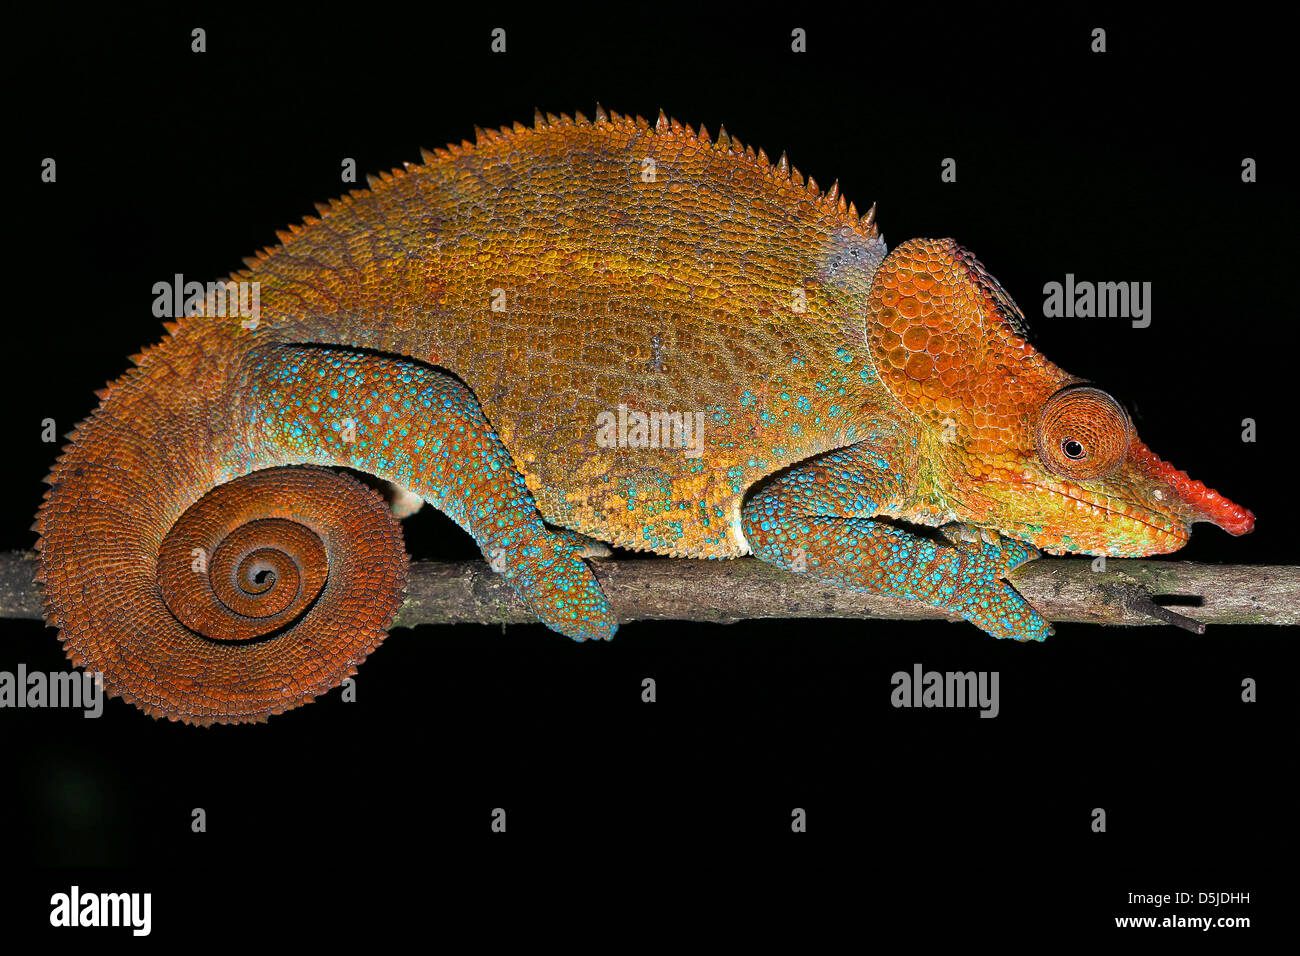 Male Cryptic or Blue-legged Chameleon (Calumma crypticum) rests on a branch in the wilds of Madagascar. Stock Photo